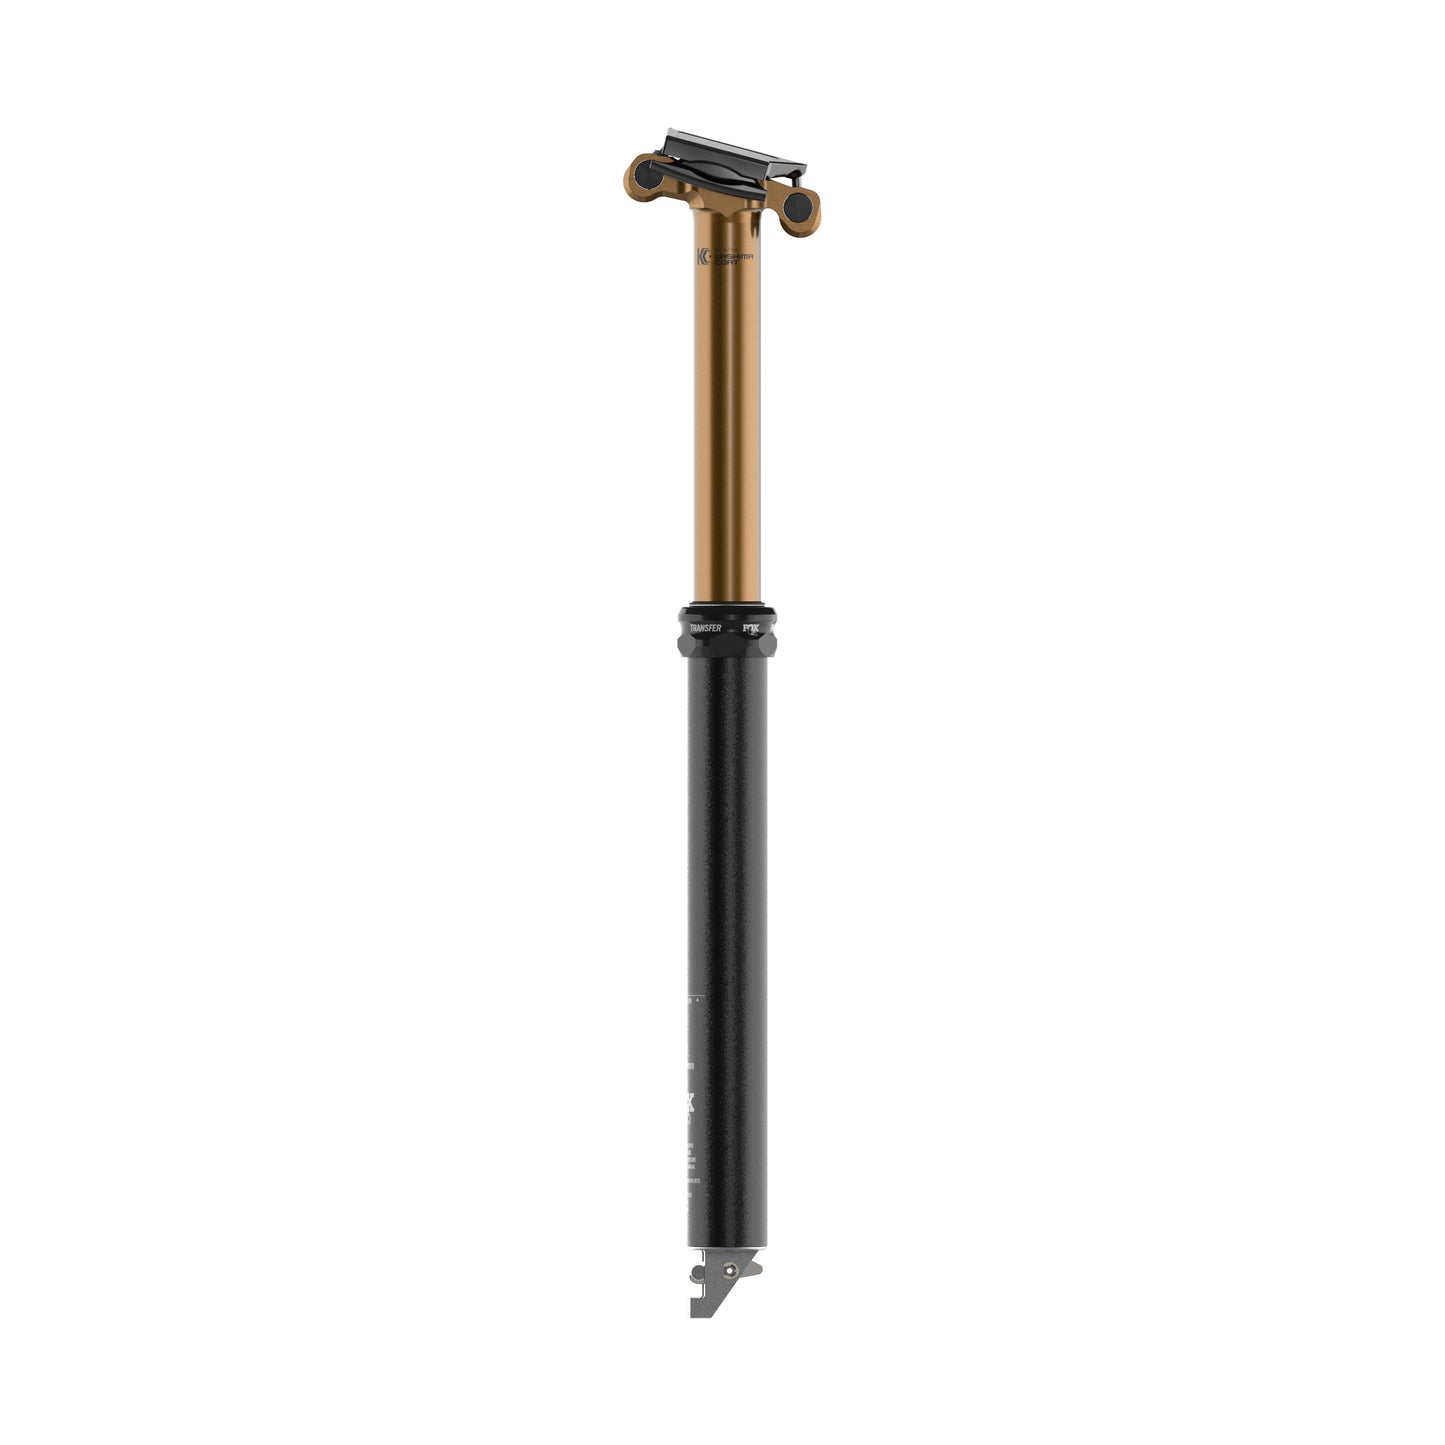 FOX TRANSFER FACTORY DROPPER SEATPOST(SAVE 30% NOW! ENTER CODE FOX30 AT CHECKOUT.)